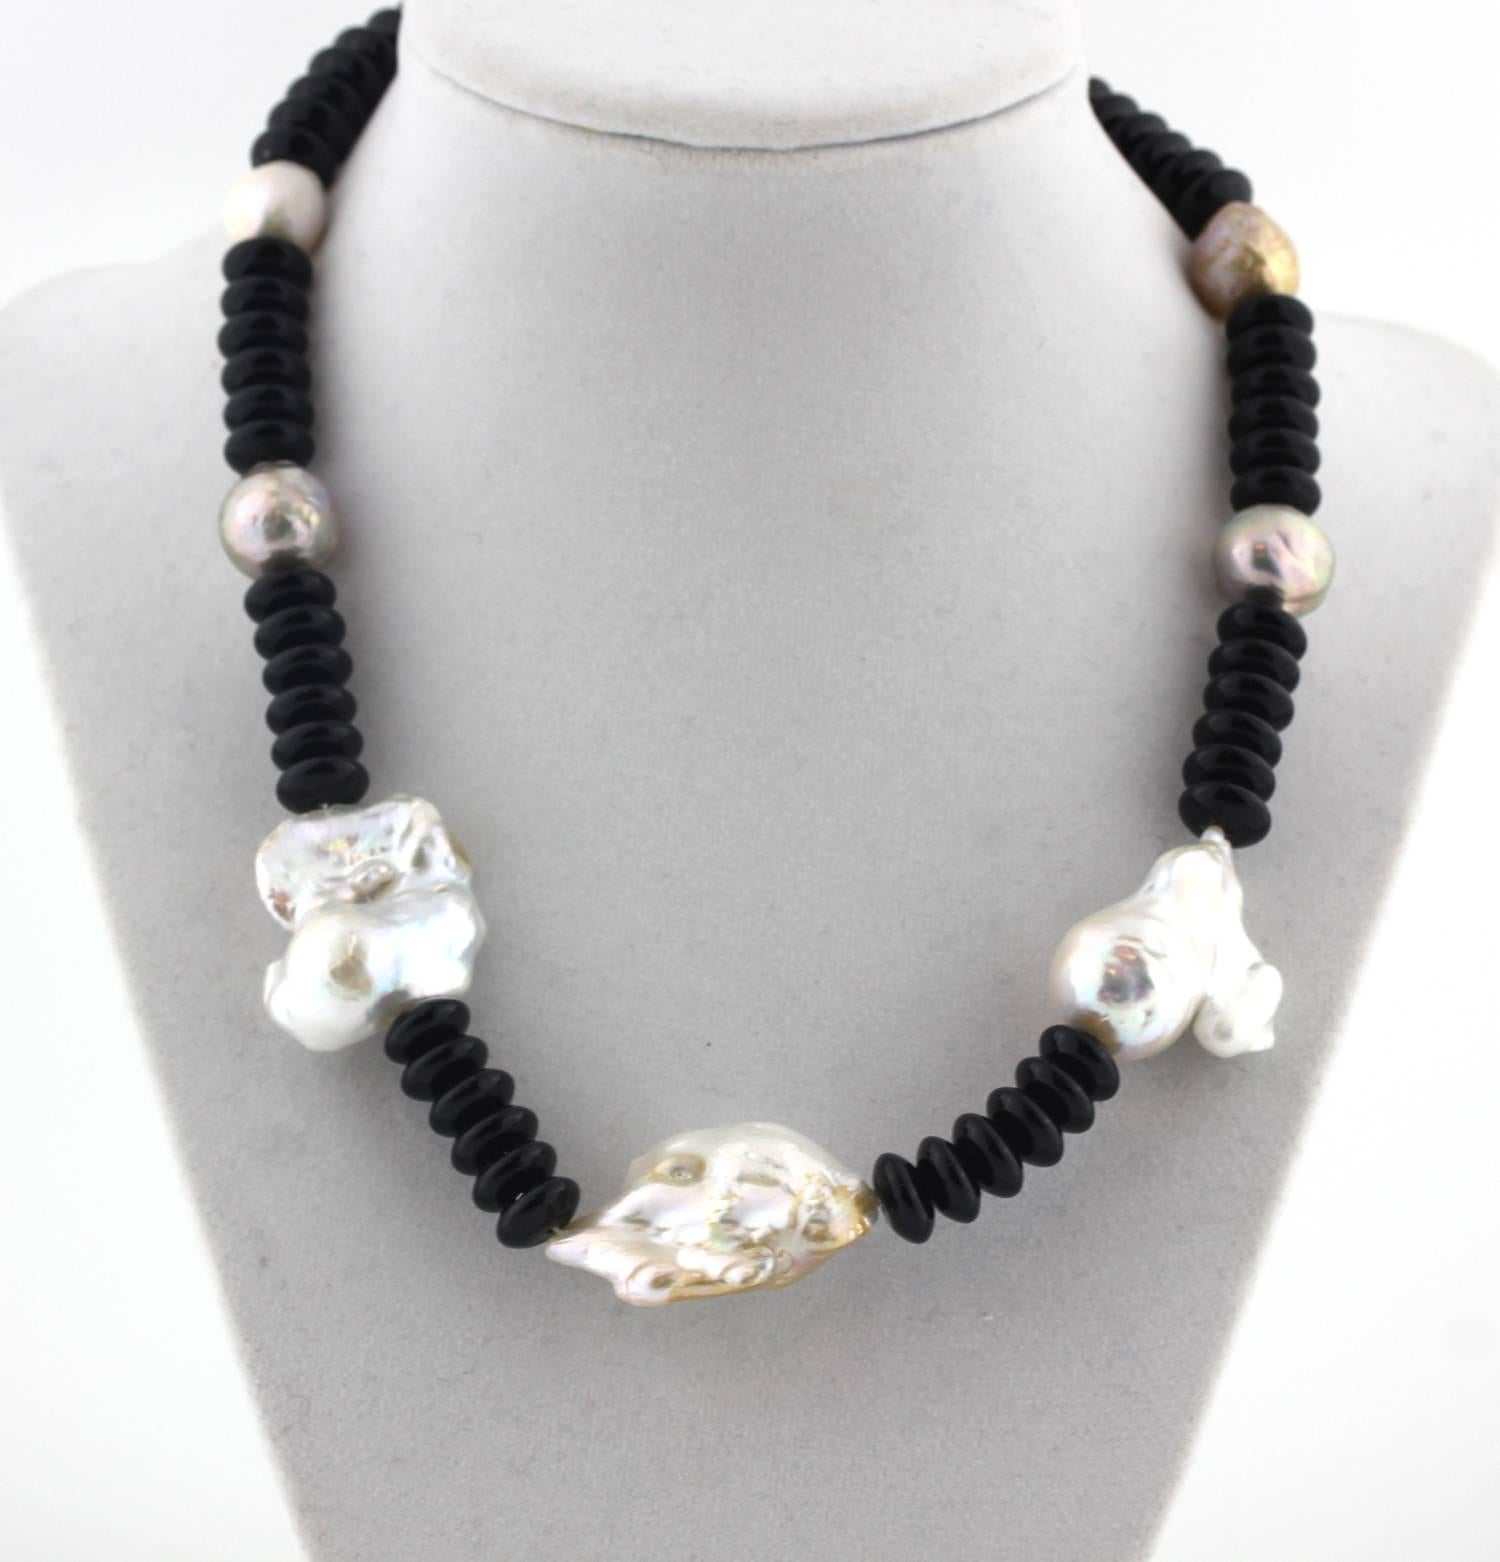 The super elegance of these beautiful silvery/platinum/white glowing Baroque Pearls is enhanced by the lovely gem cut and polished black natural Onyx rondels
Size:  largest Pearl 23 mm x 35 mm
Length:  18.25 inches
Clasp:  Pearl
